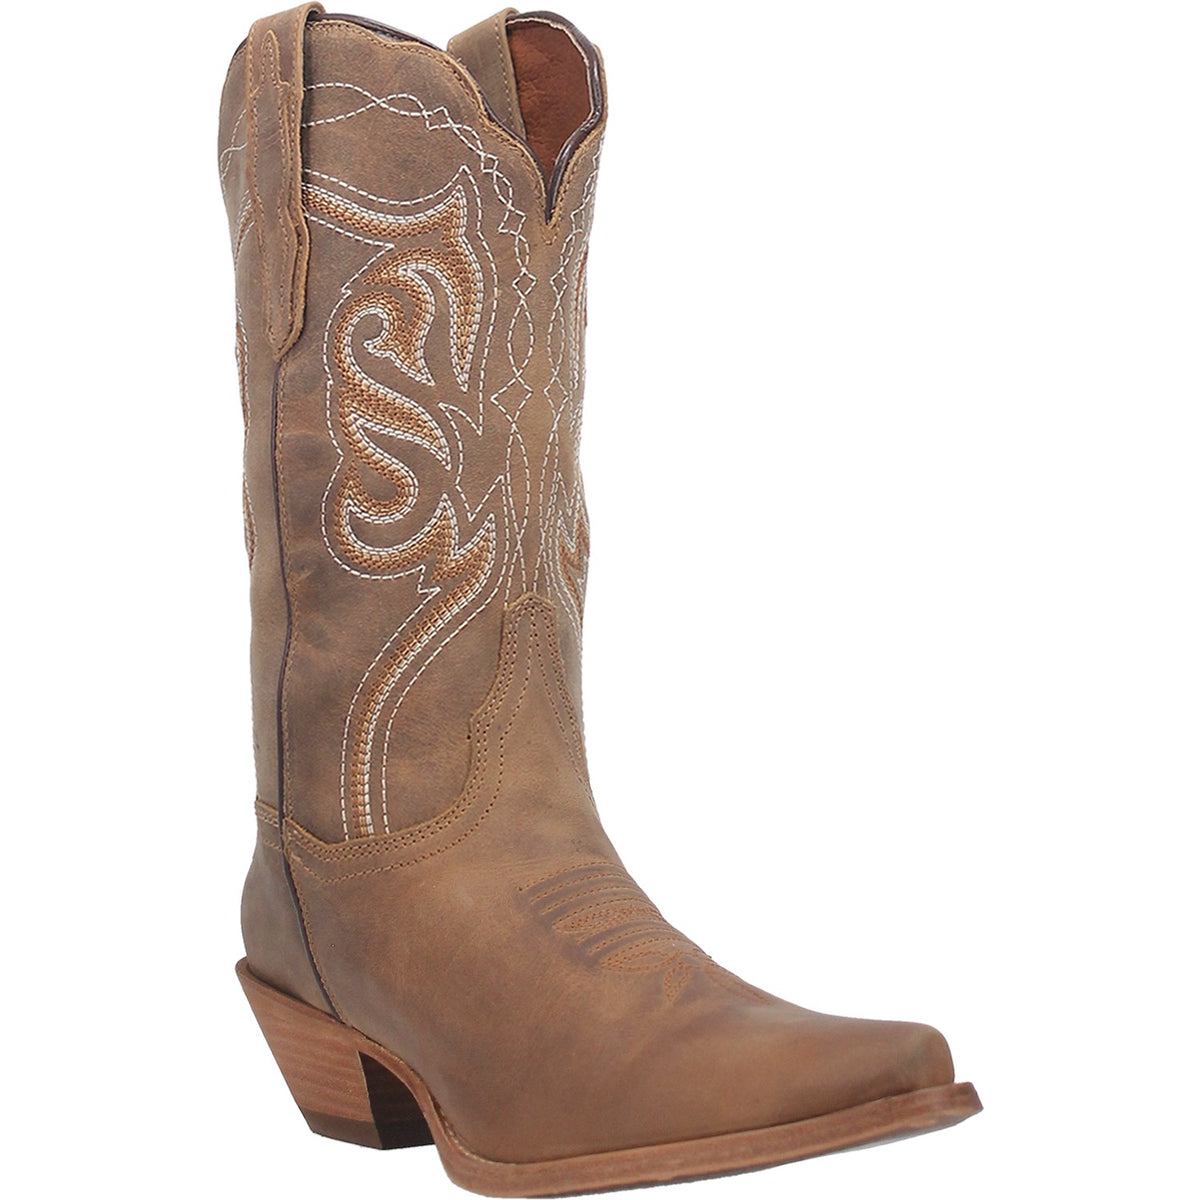 KARMEL LEATHER BOOT Cover